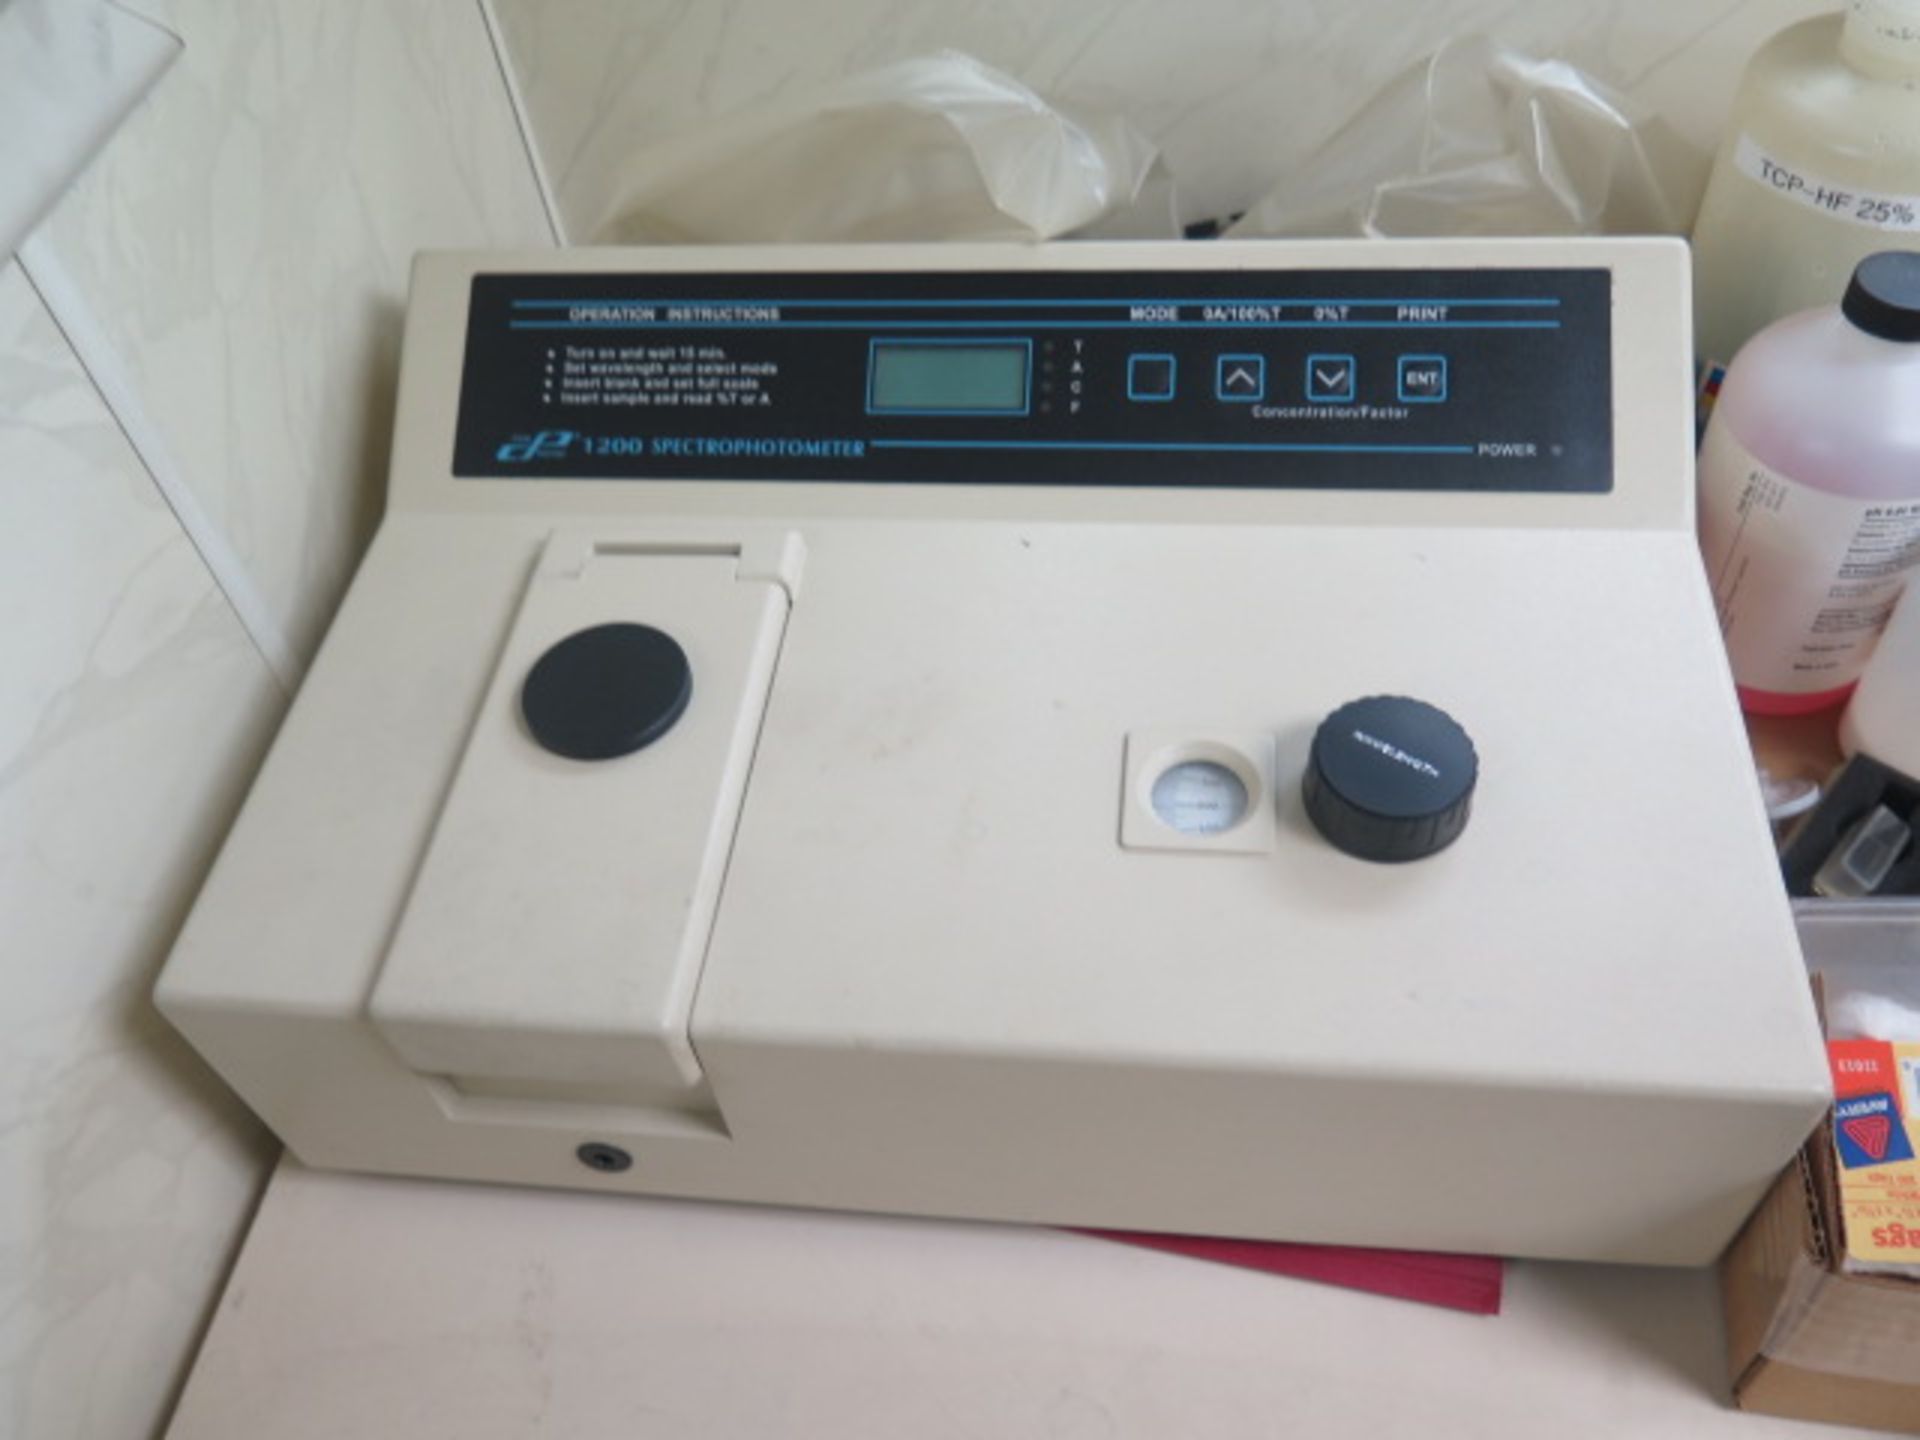 Cole Parmer mdl. 1200 Spectrophotometer w/ Acces (SOLD AS-IS - NO WARRANTY) - Image 2 of 6